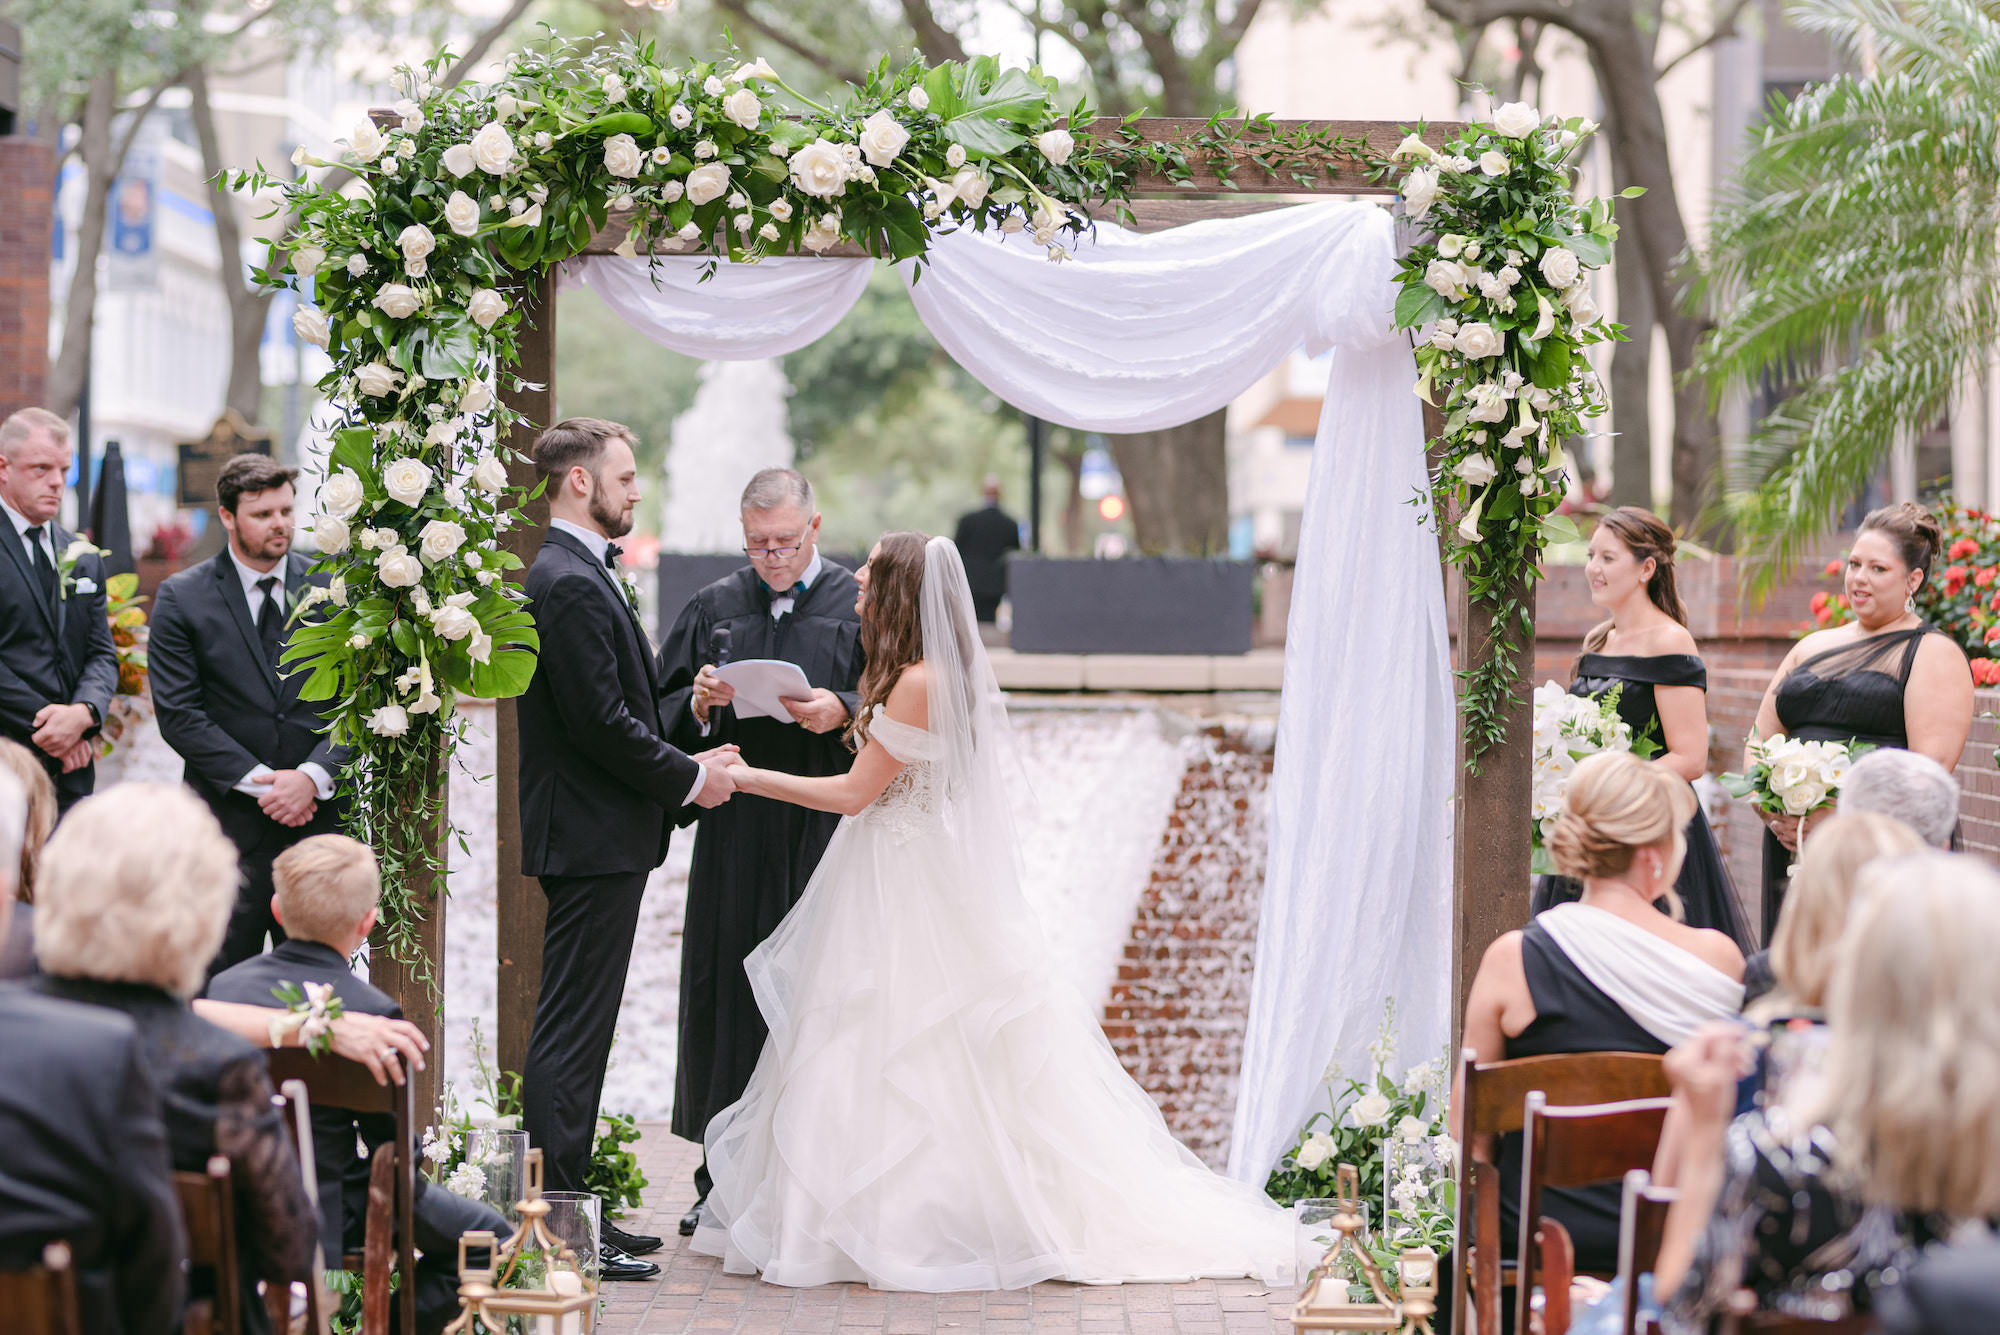 Outdoor Courtyard Ceremony with Waterfall Fountain Backdrop | Venue Hilton Tampa Downtown